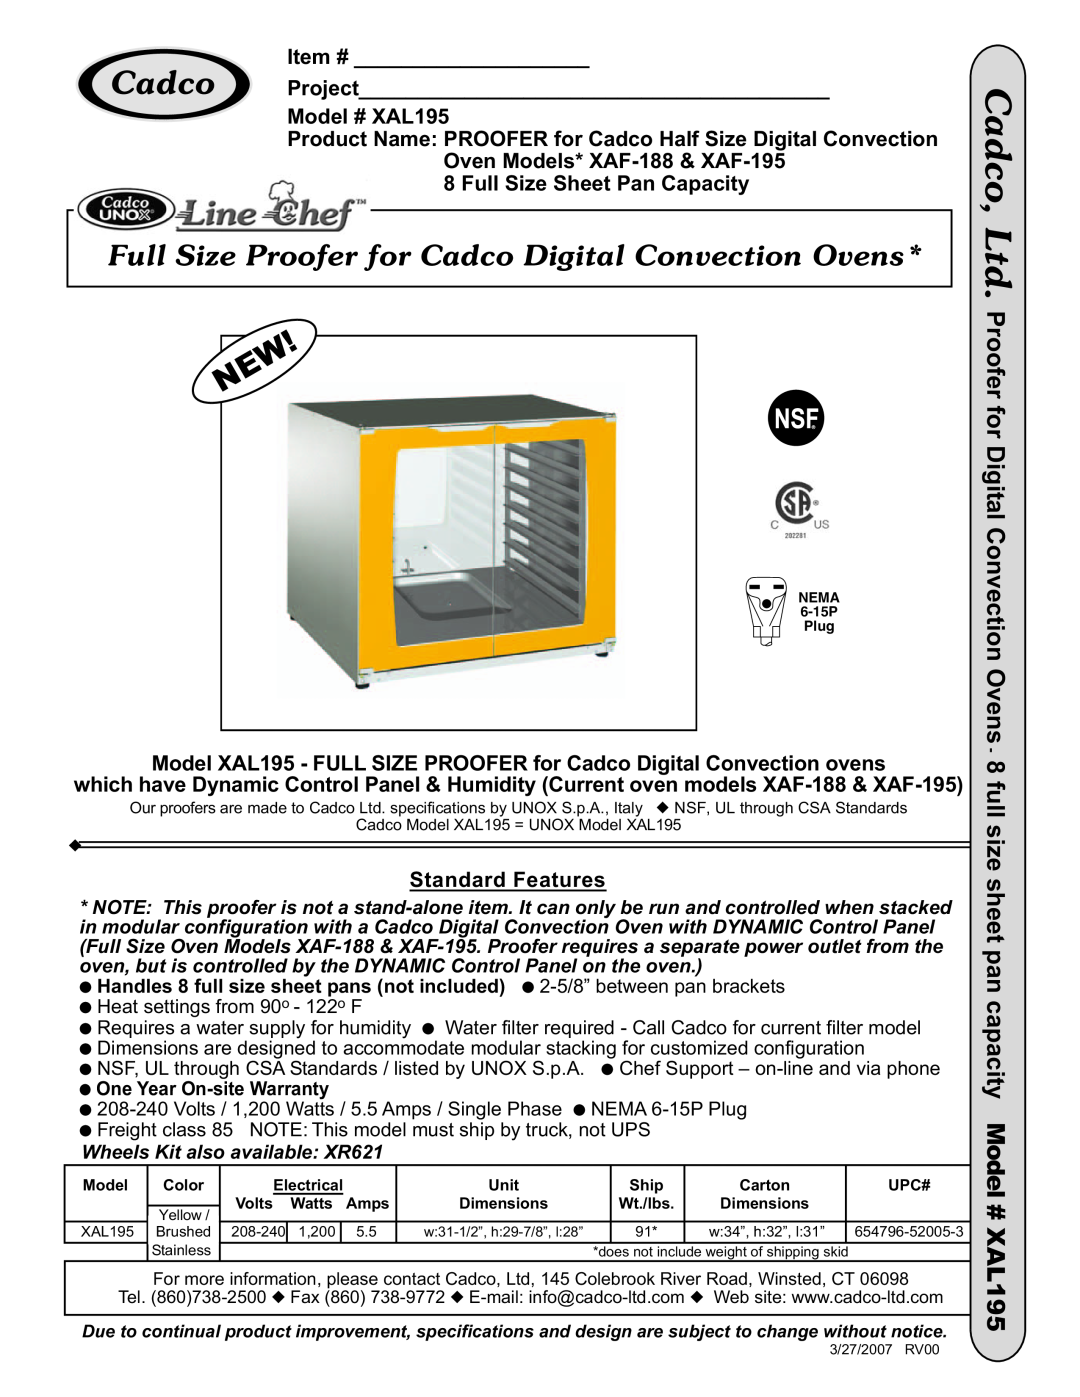 Cadco XAL-195 specifications for Digital Convection Ovens, Model # XAL195, Item #, Project, Oven Models* XAF-188& XAF-195 